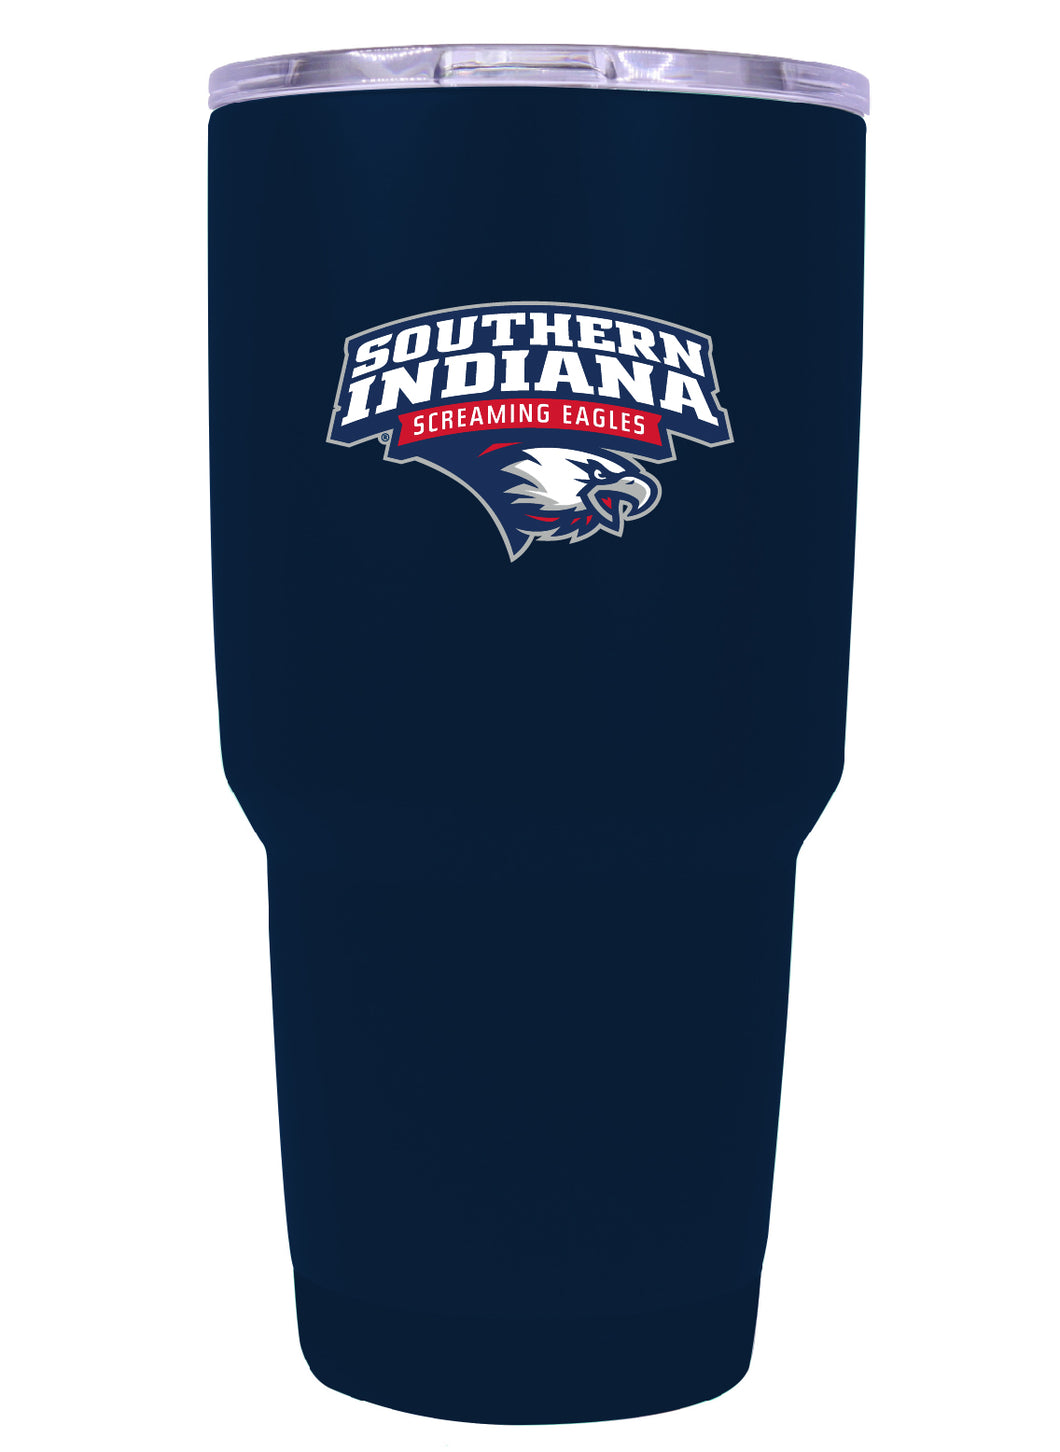 University of Southern Indiana Mascot Logo Tumbler - 24oz Color-Choice Insulated Stainless Steel Mug